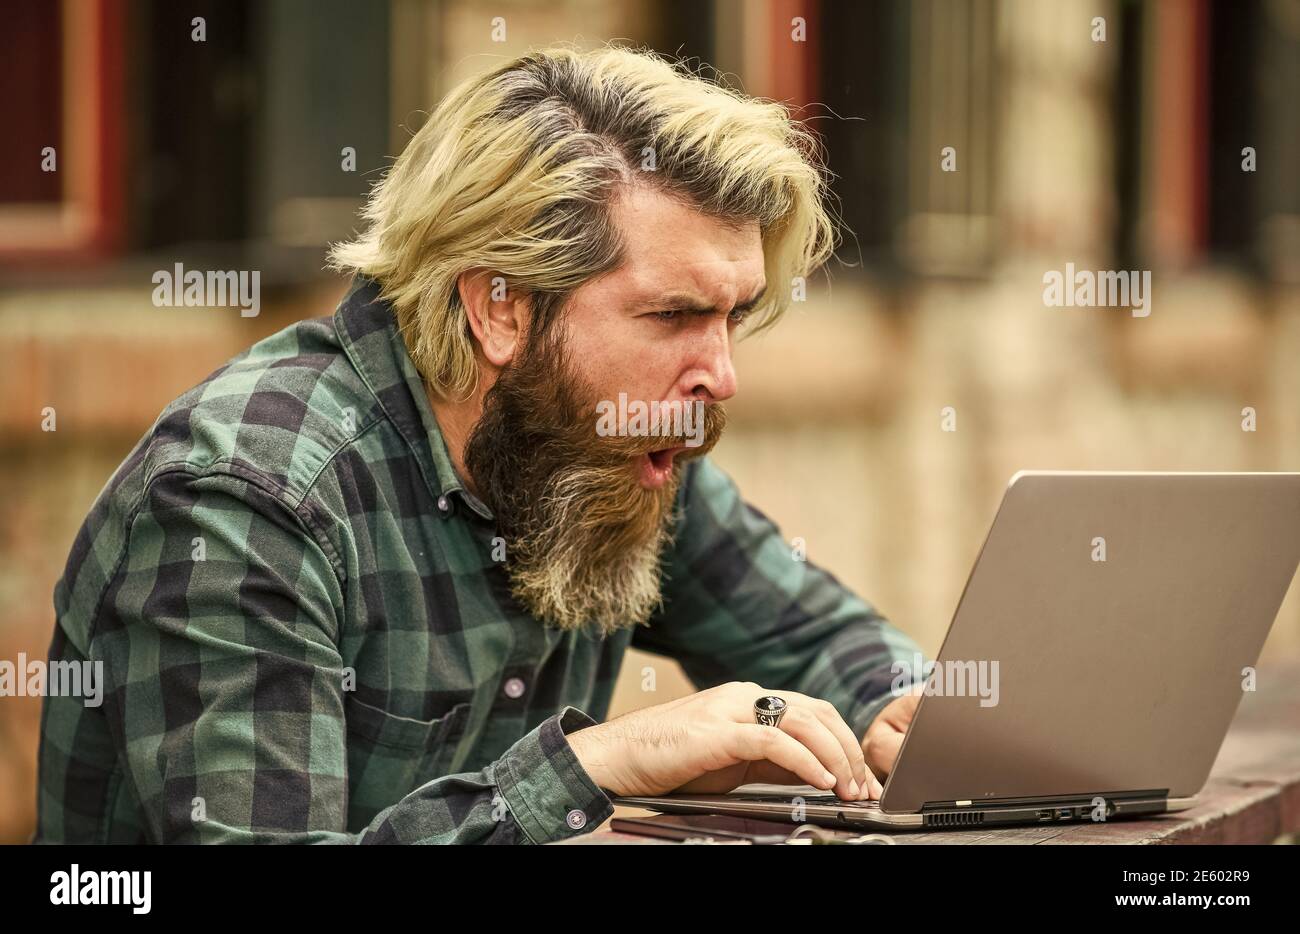 Businessman laptop terrace. Online education. Surfing internet. Modern communication. Risky shopping. Stock trader. Online business. Online entrepreneur working outdoors. Man busy work with laptop. Stock Photo